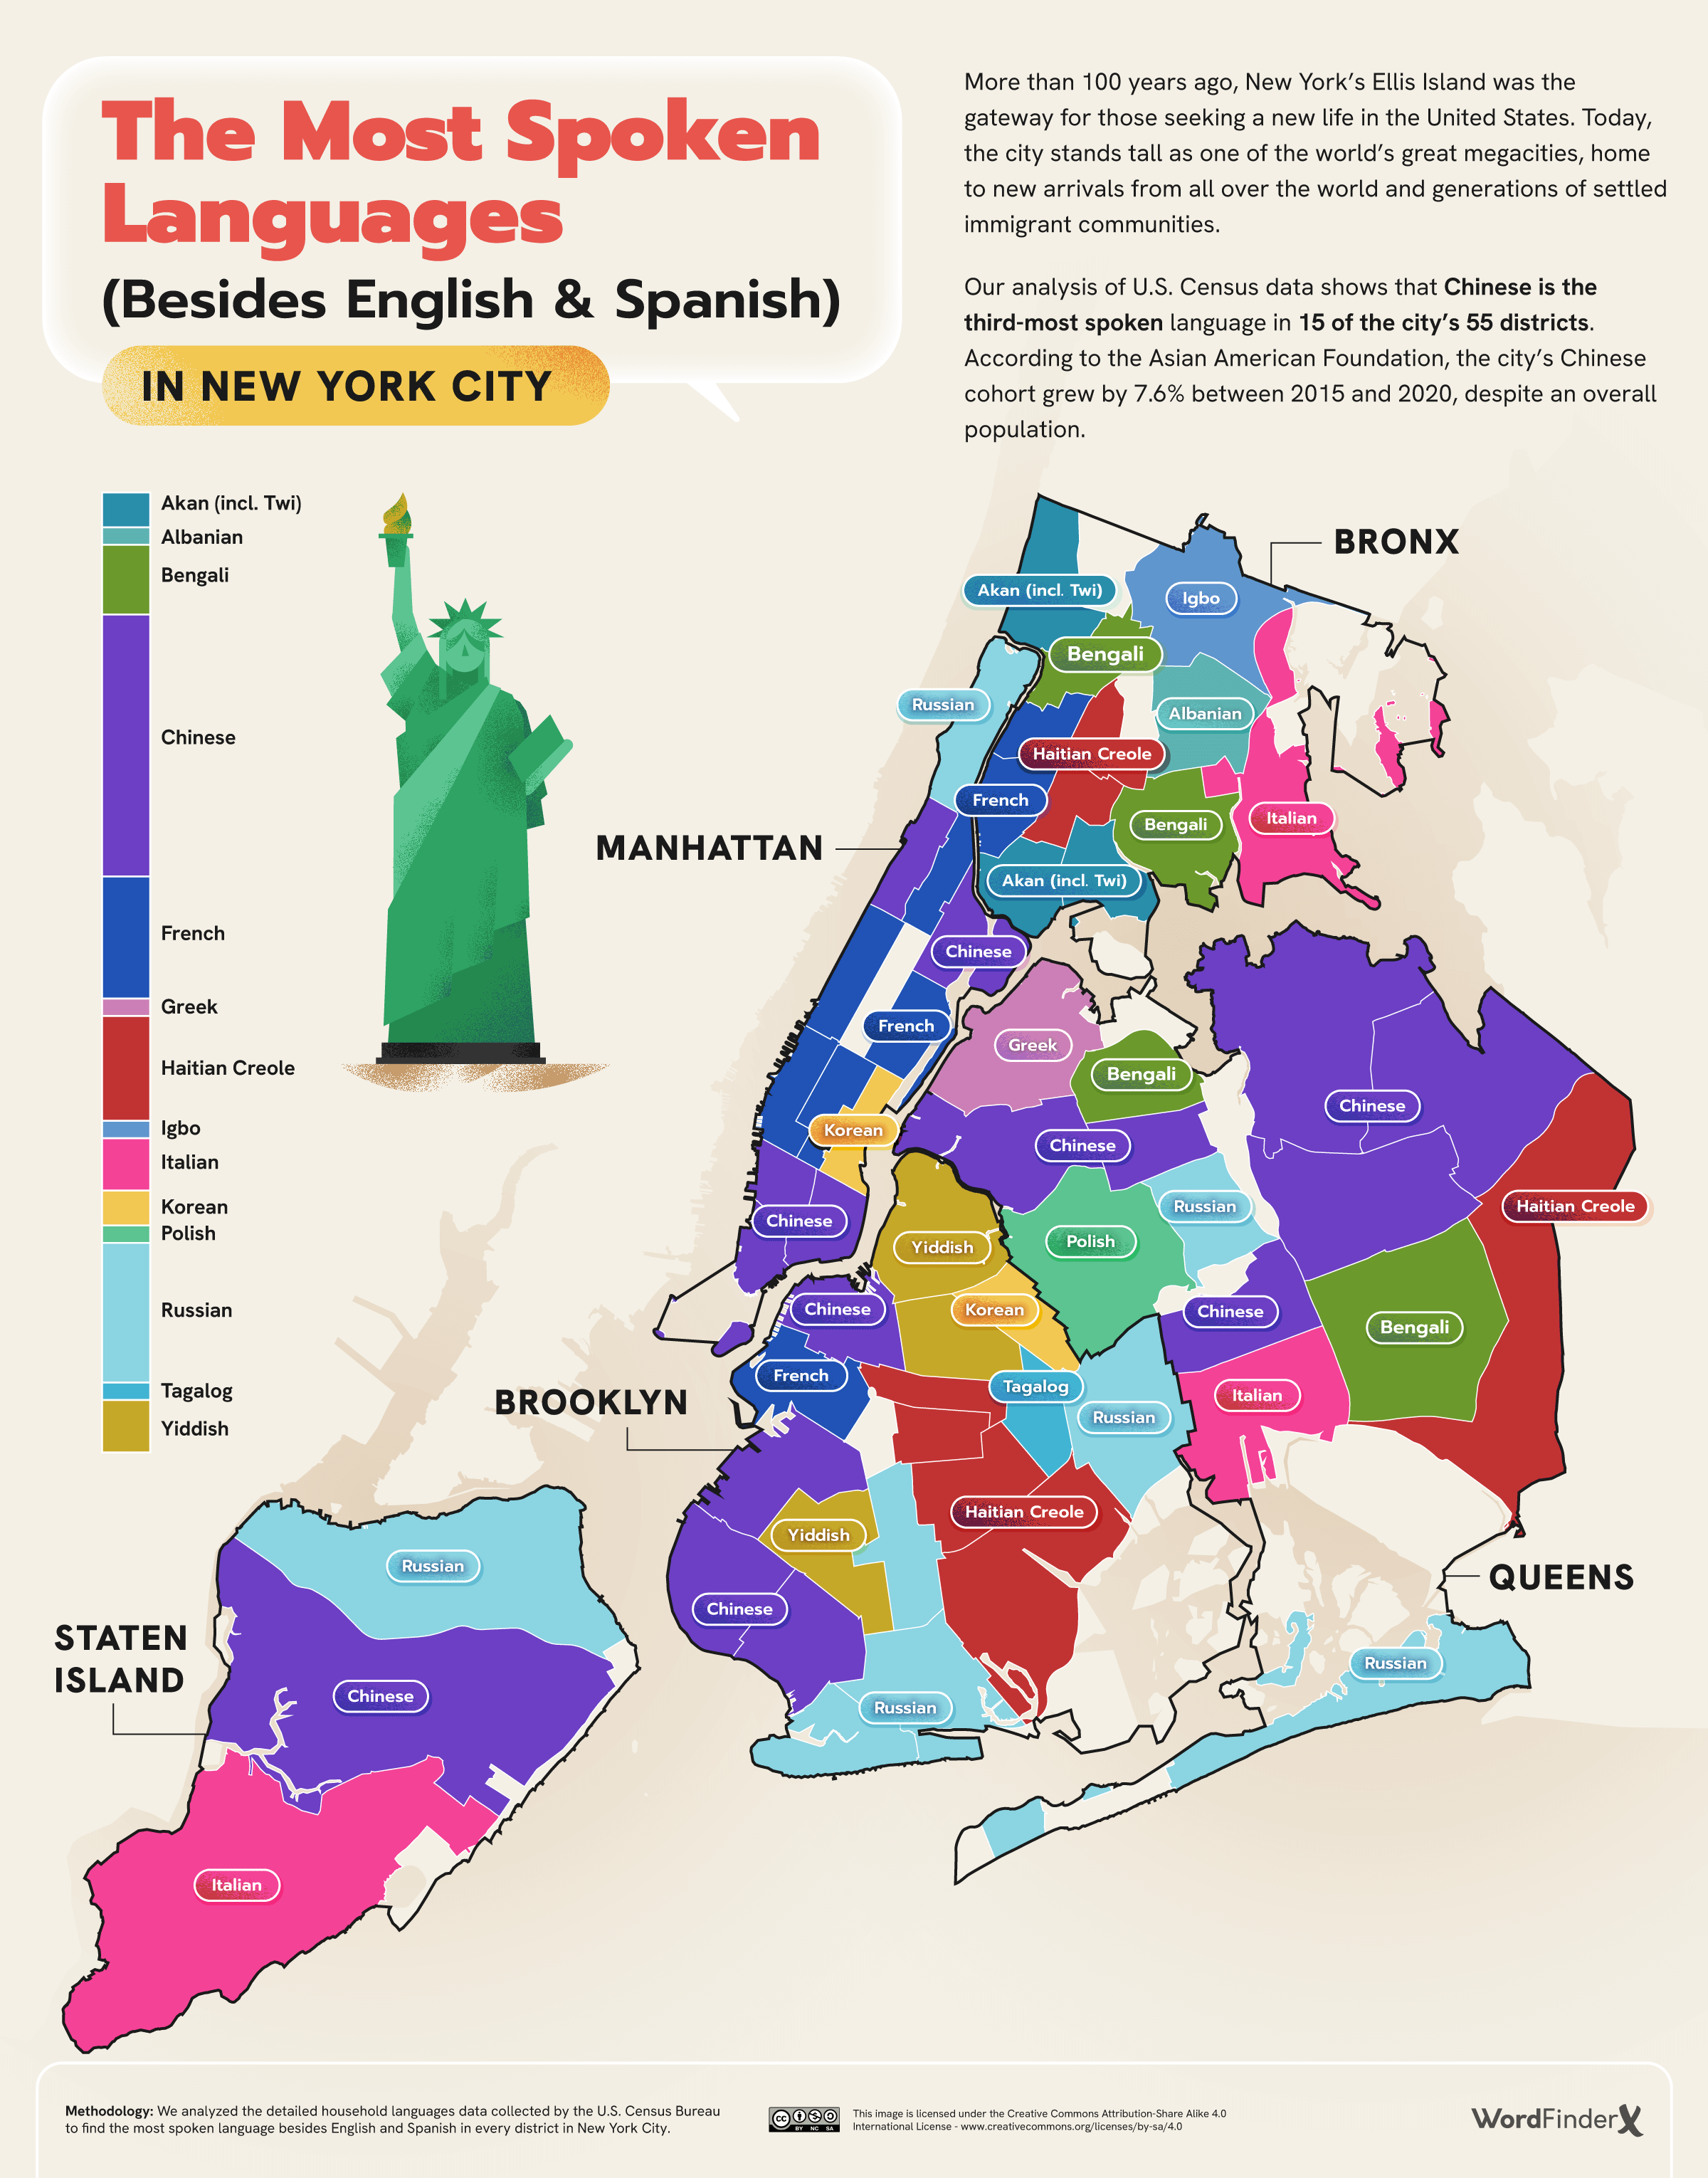 The-Most-Spoken-Languages-Besides-English-Spanish-in-New-York-City